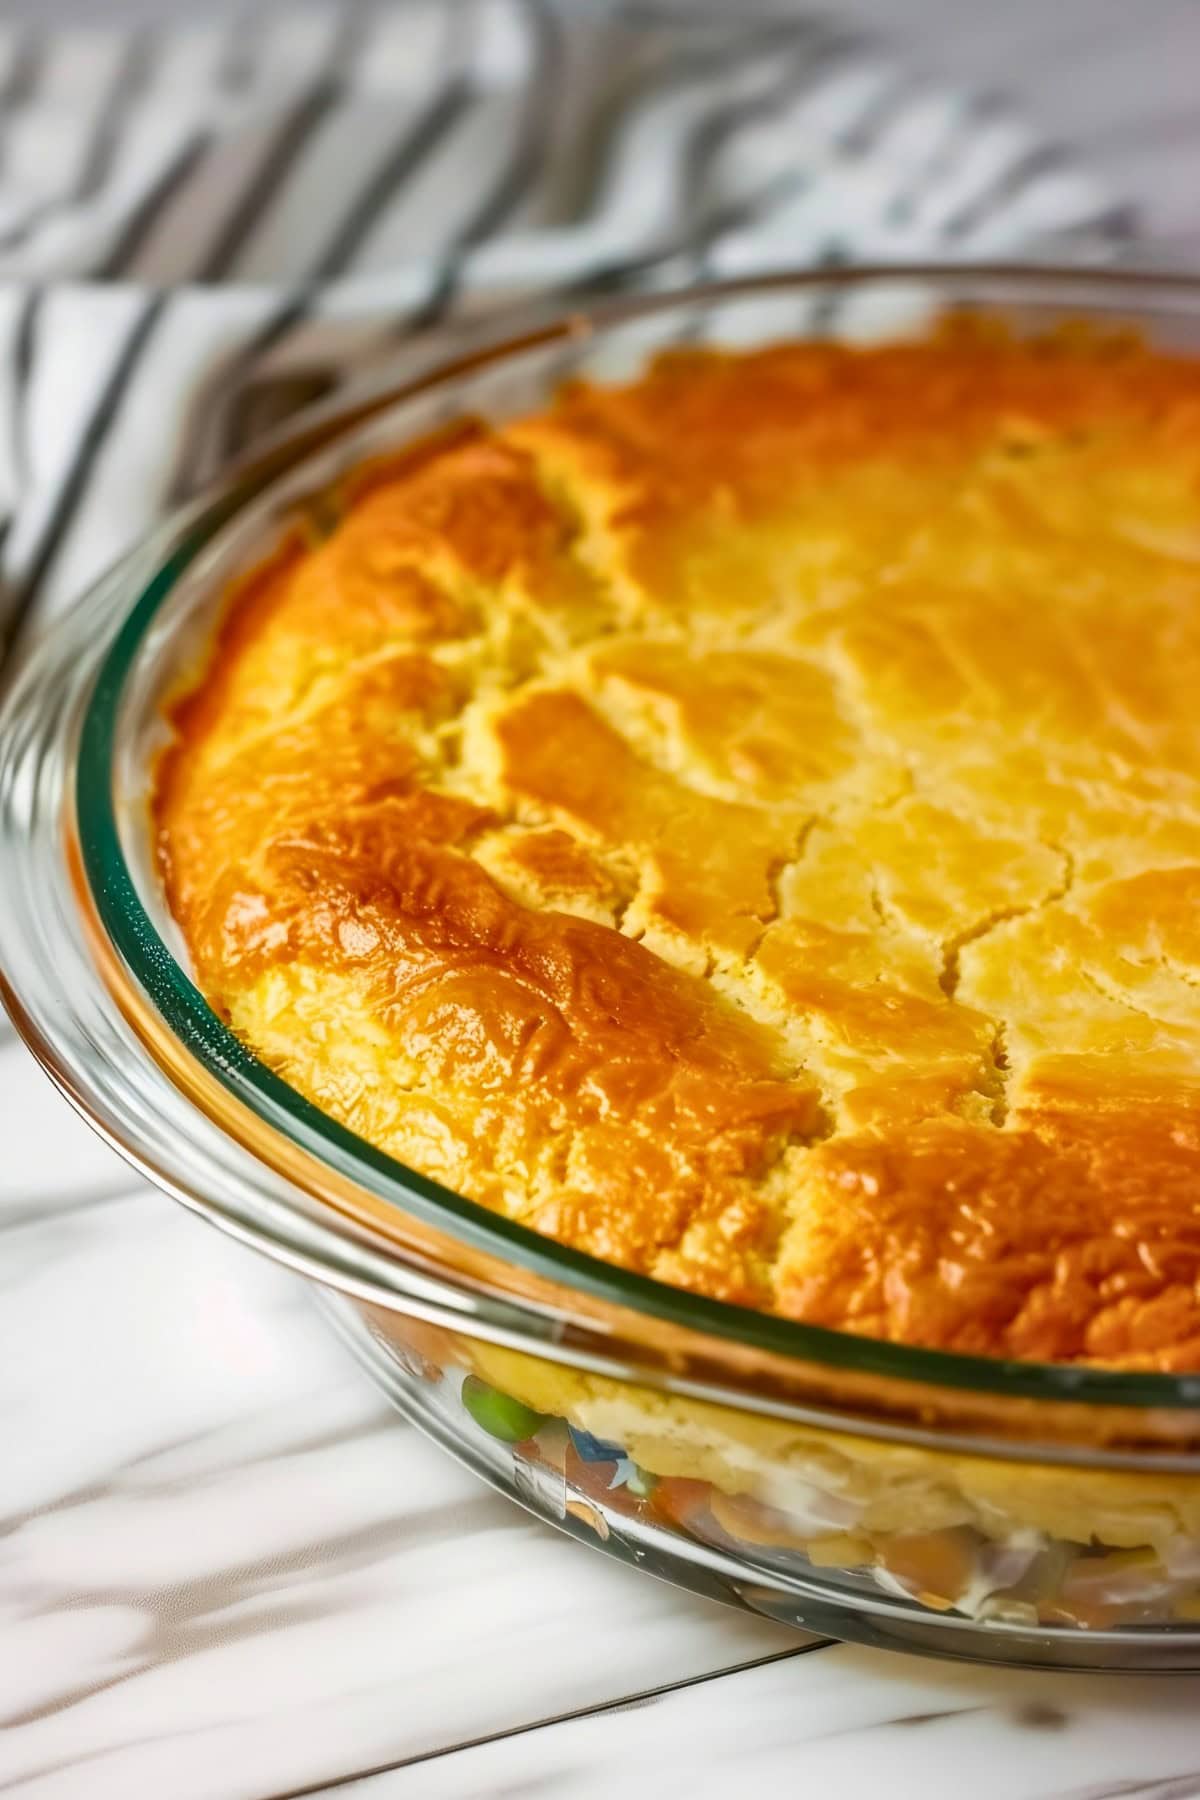 Close Up View of Baked Bisquick Chicken Pot Pie in Pie Dish with Flaky, Golden Crust